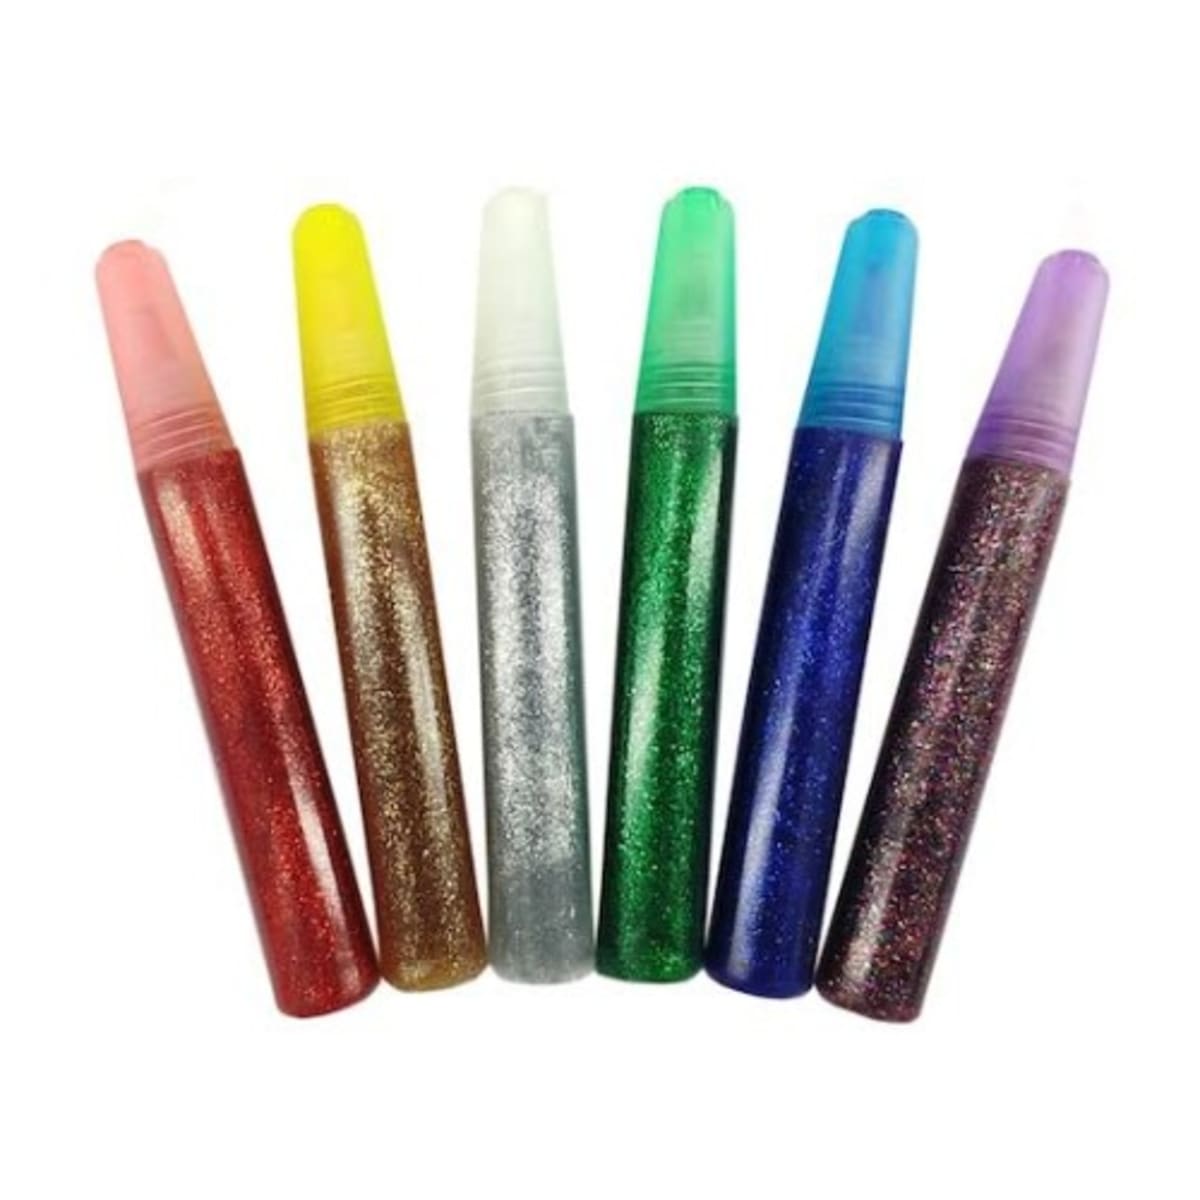 15 ml Glitter Assorted Colors Fabric Paint Pens - Set of 24 (24 Piece(s))